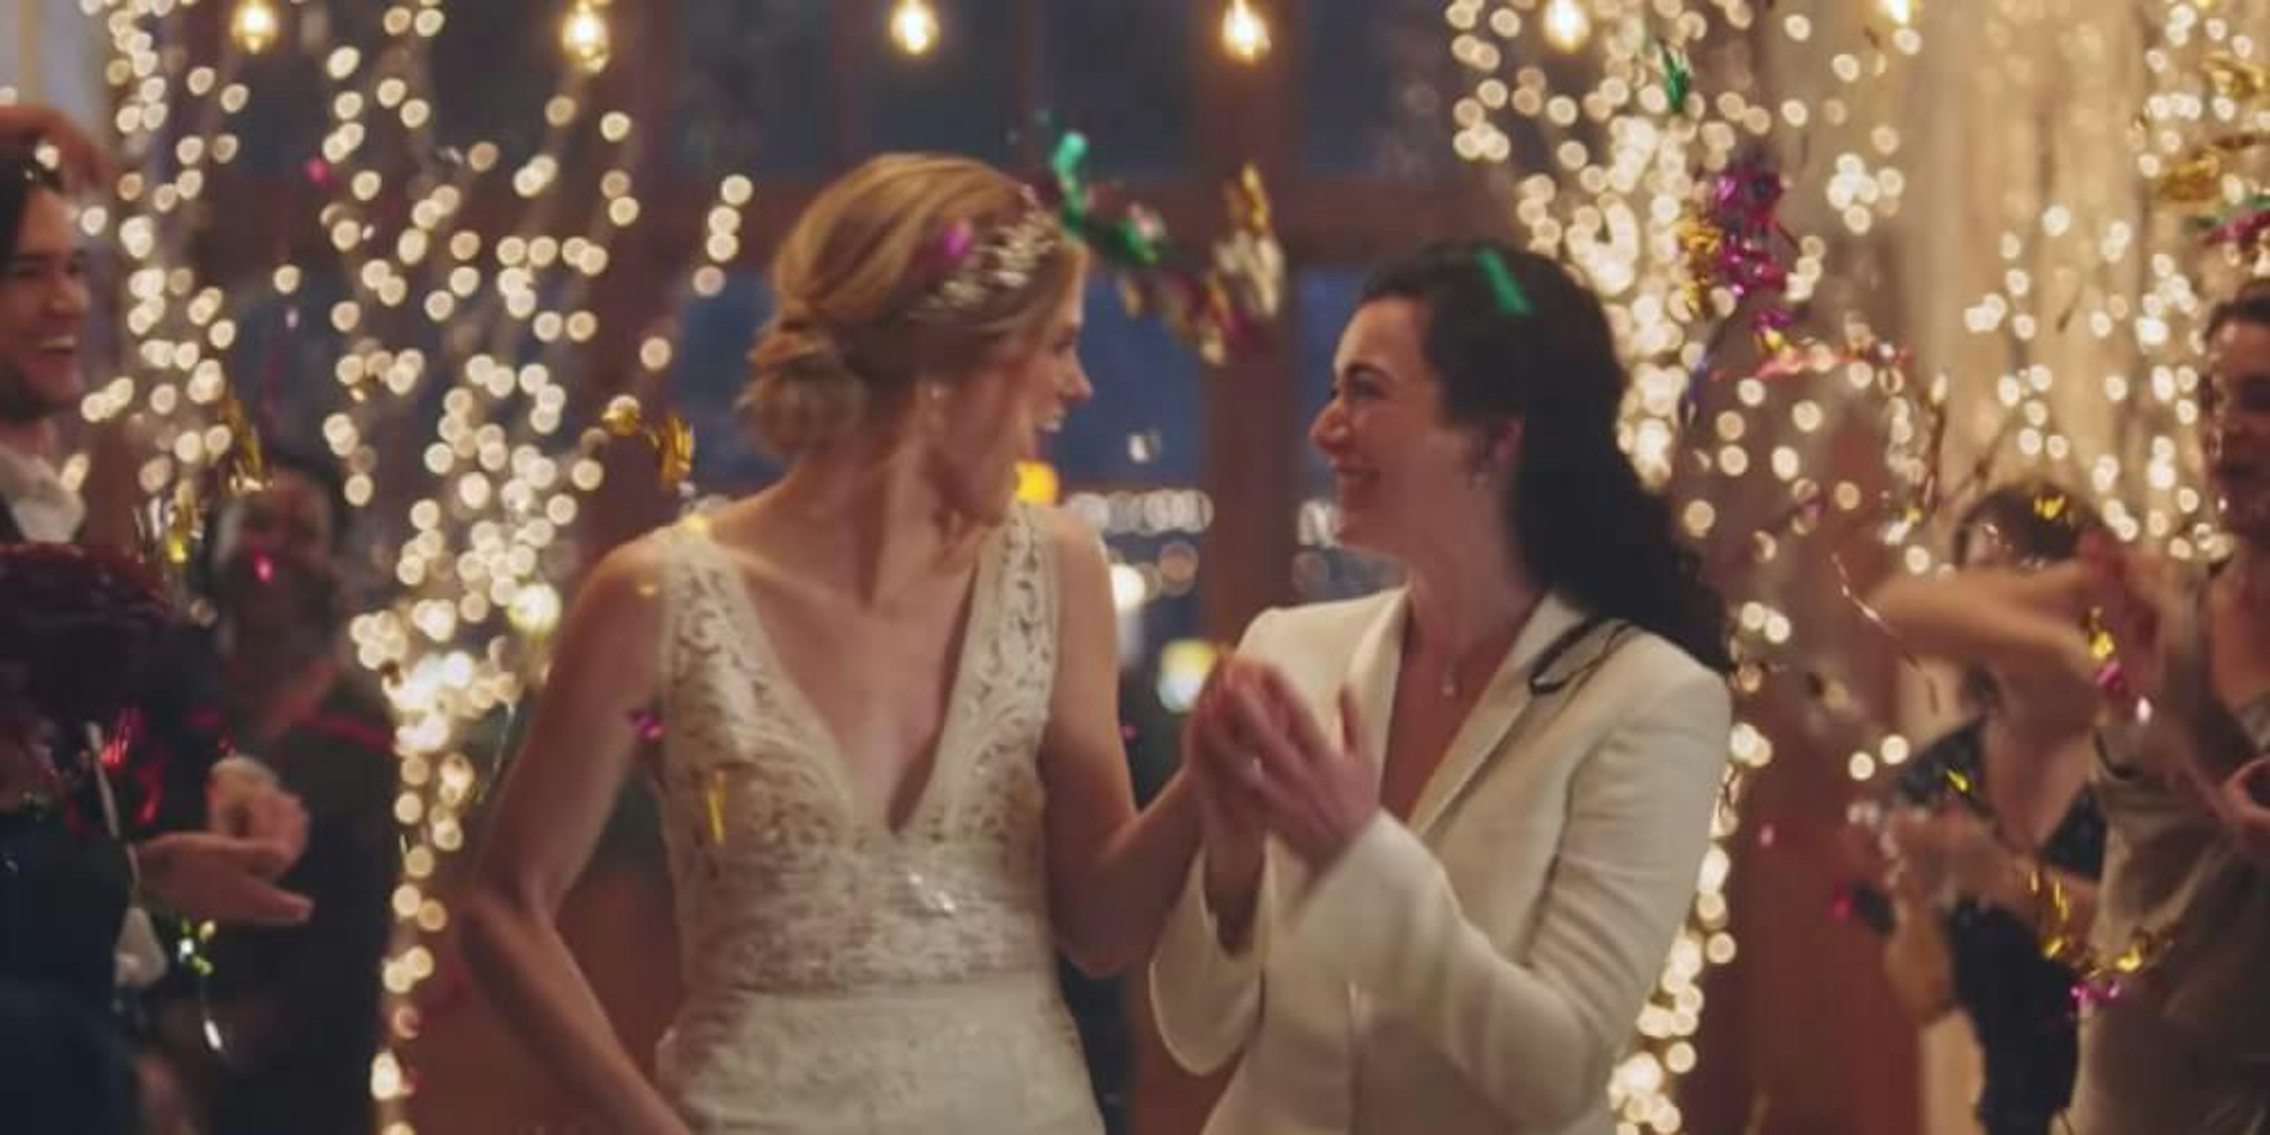 Hallmark Pulls Ad Featuring Lesbian Couple After Conservative Protest 1717